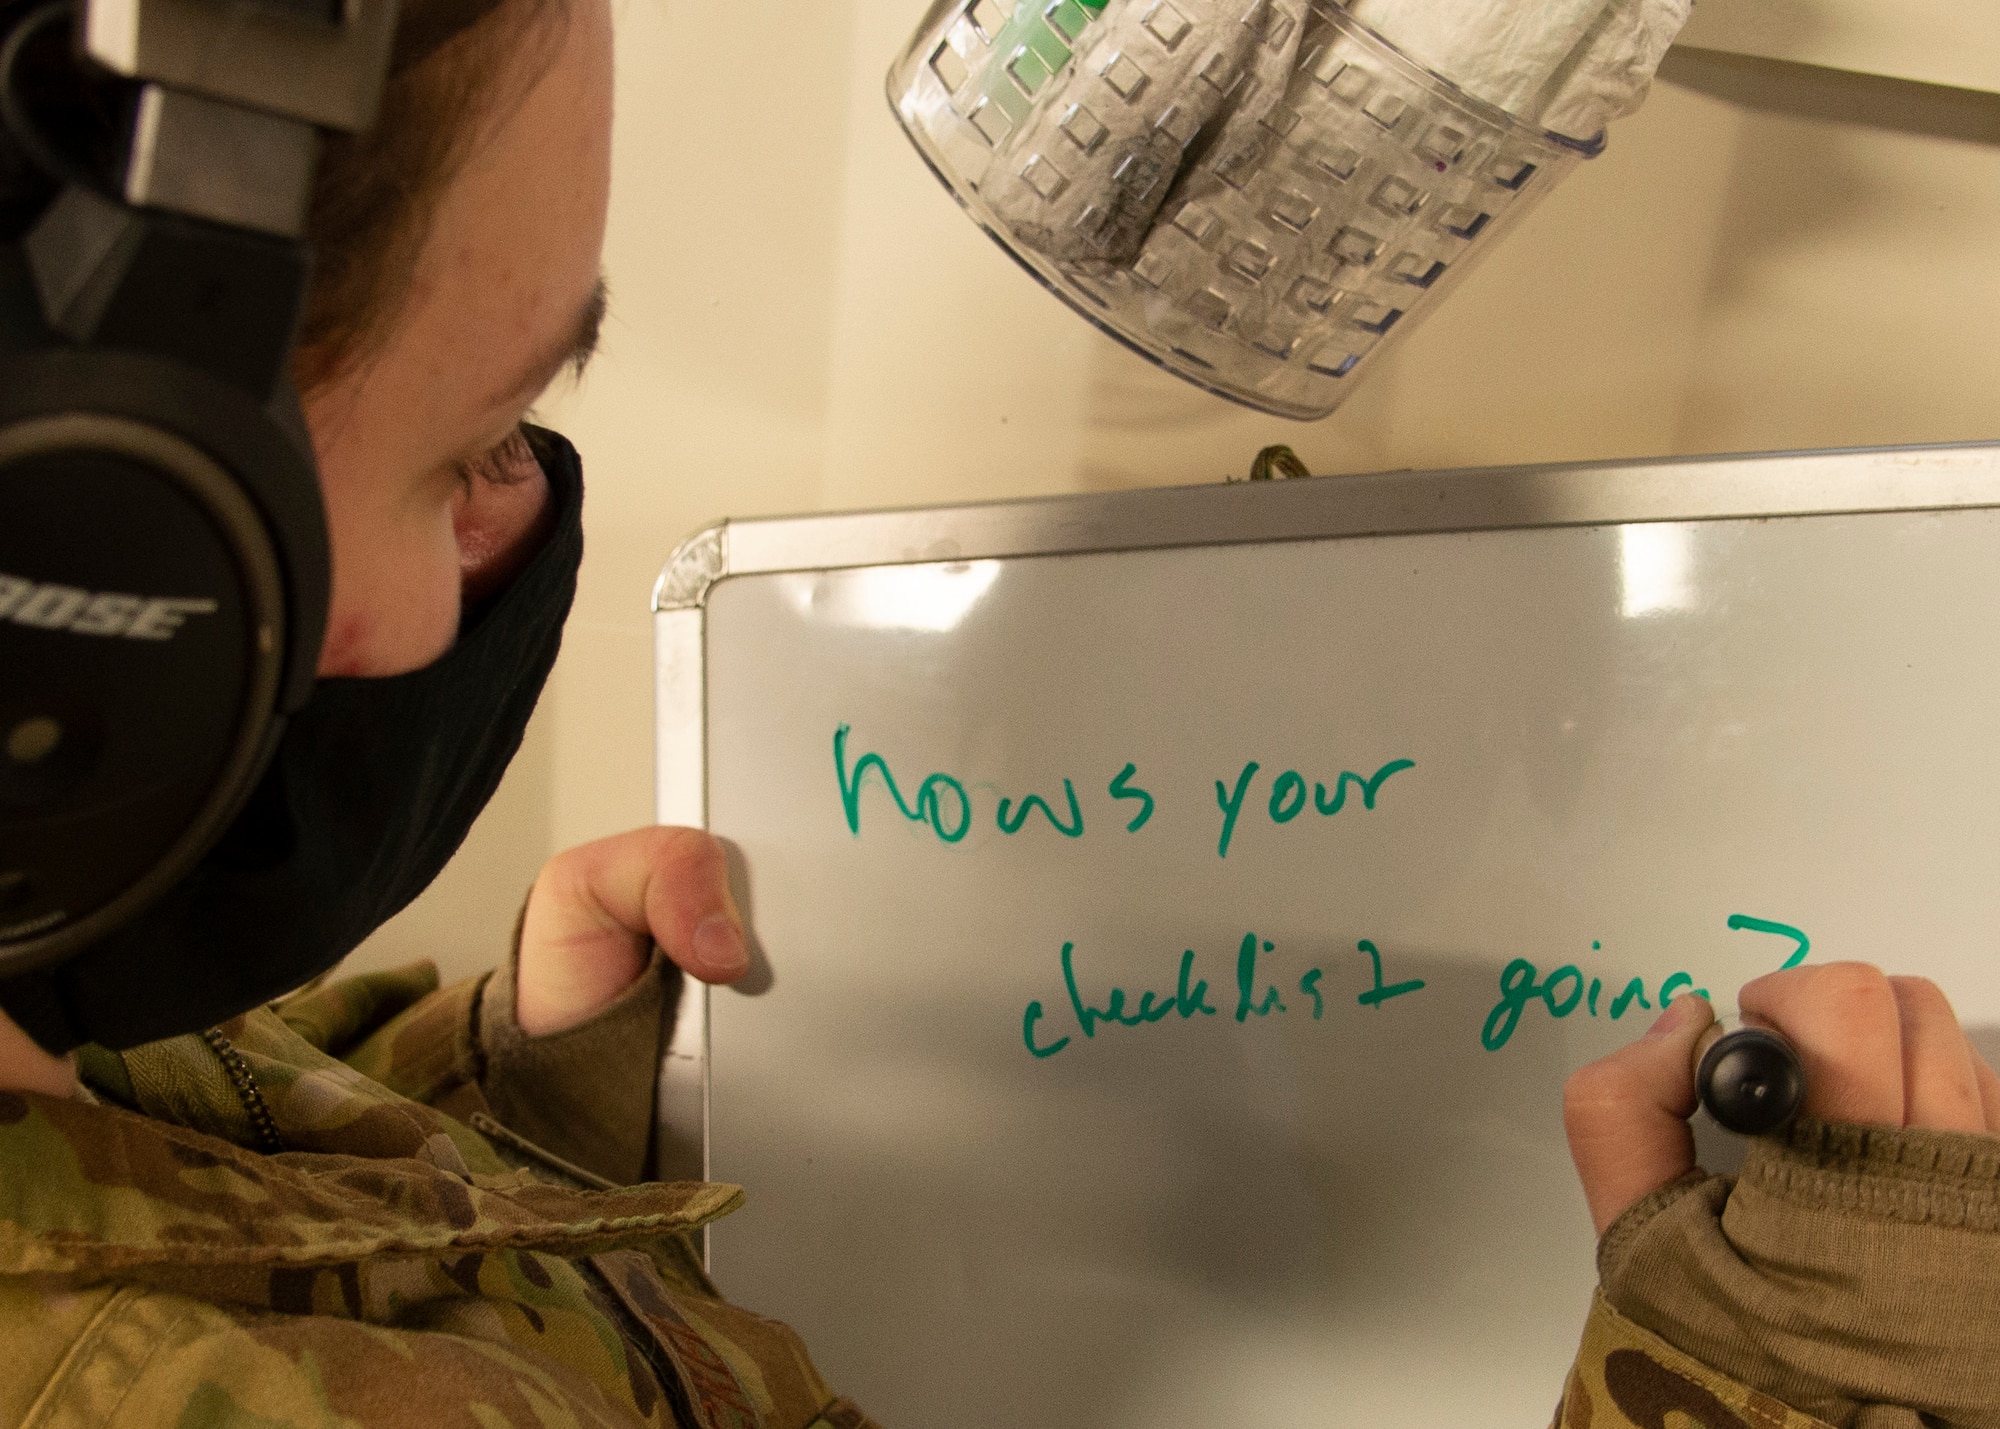 U.S. Air Force Staff Sgt. Rileigh Schickel, 10th Expeditionary Aeromedical Evacuation Flight aeromedical evacuation technician, writes a message on a whiteboard during a training at Ramstein Air Base, Germany, Jan. 26, 2021. Exchanging written messages through the window of the Negatively Pressurized Conex is an important secondary method of communication. The NPC used in the training is permanently assigned to the 521st Air Mobility Operations Wing here and offers infectious disease transport capabilities to Europe and Africa. (U.S. Air Force photo by Airman 1st Class Daniel Sanchez)